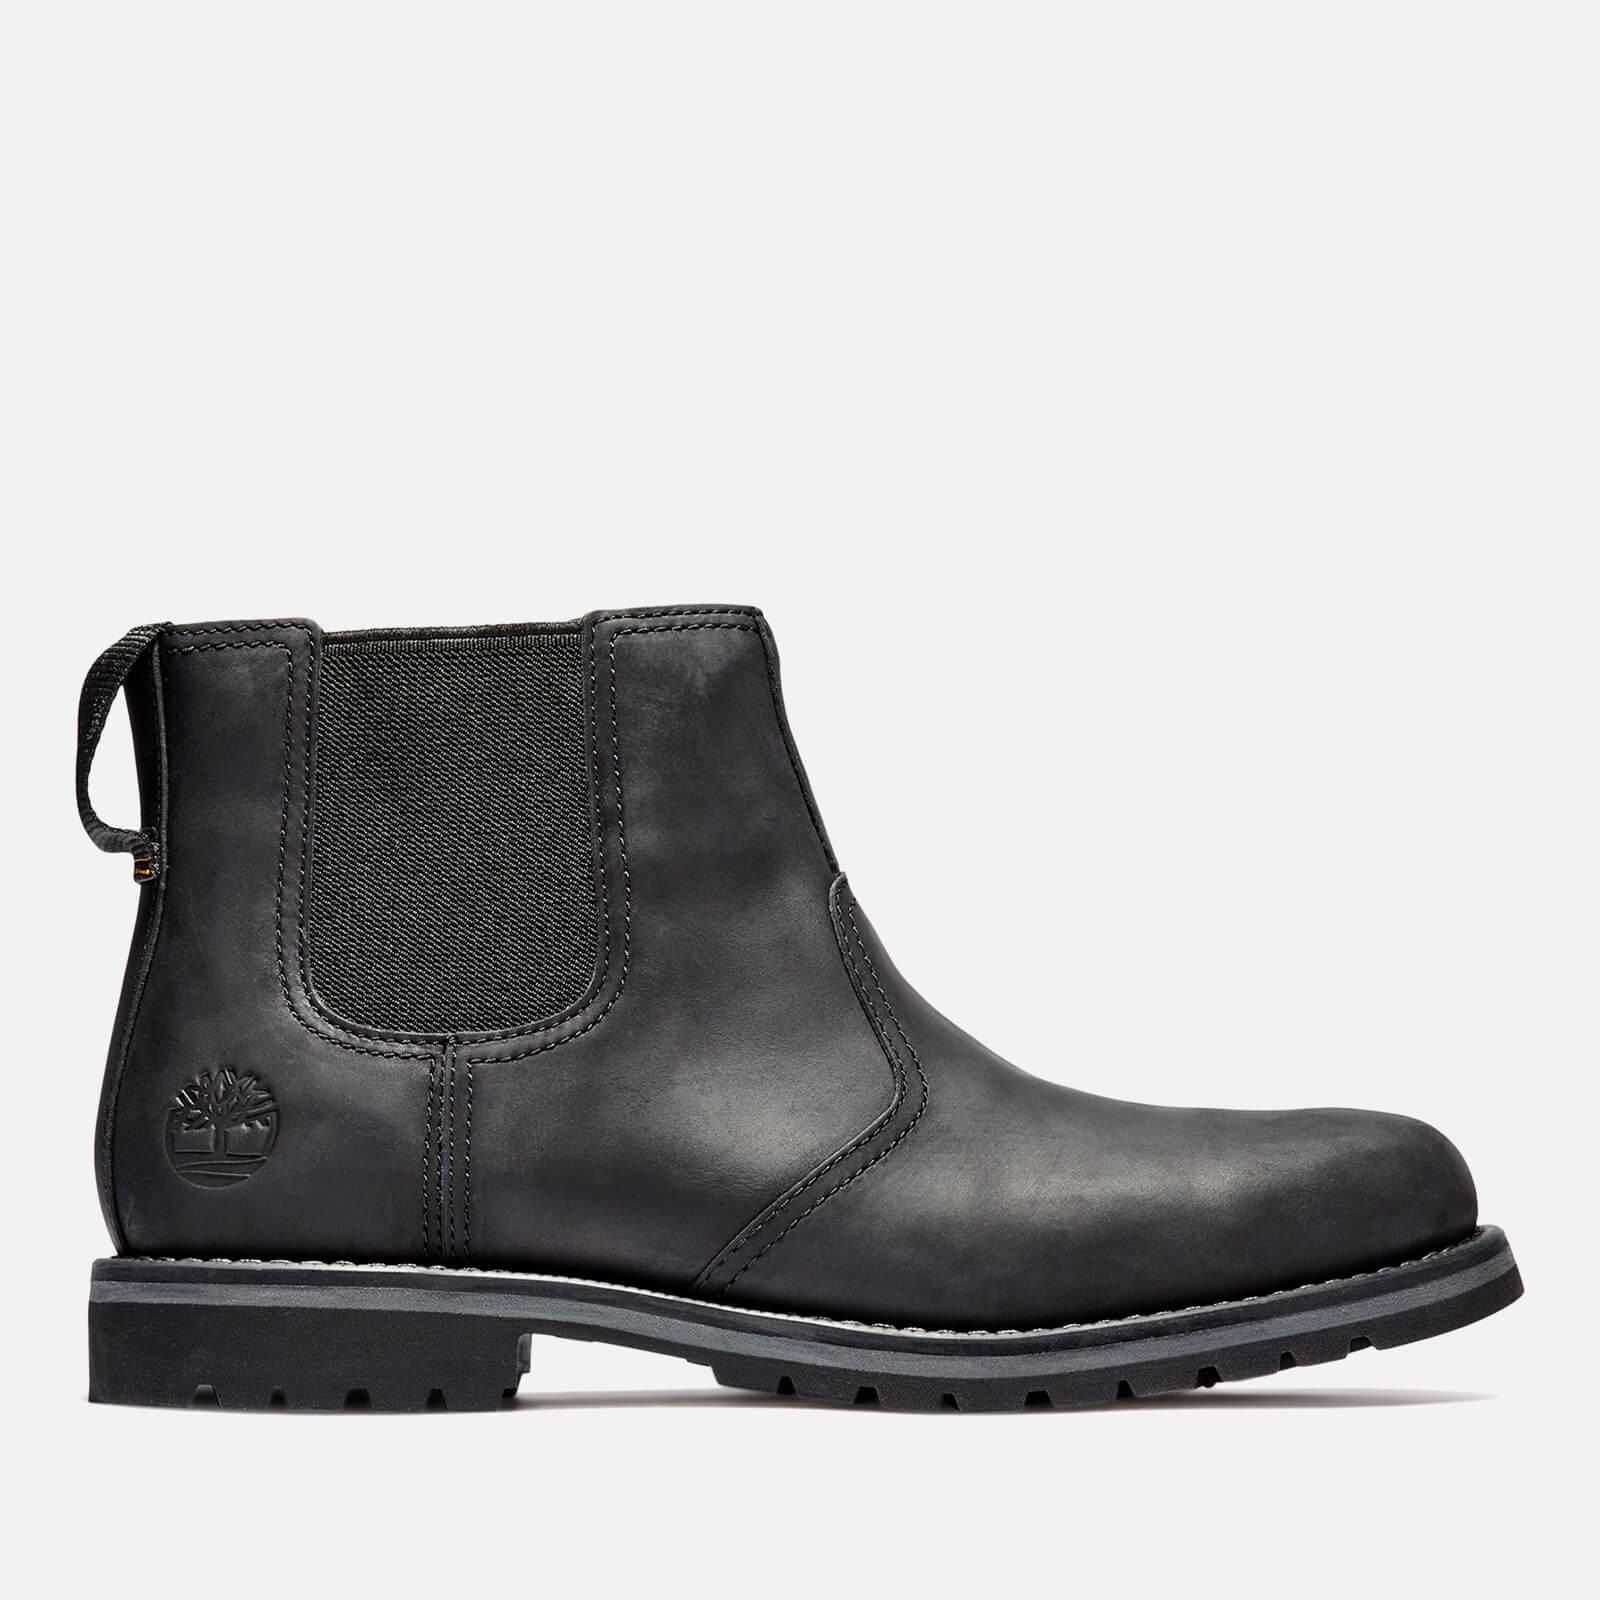 Timberland Men’s Larchmont Leather Chelsea Boots - Black